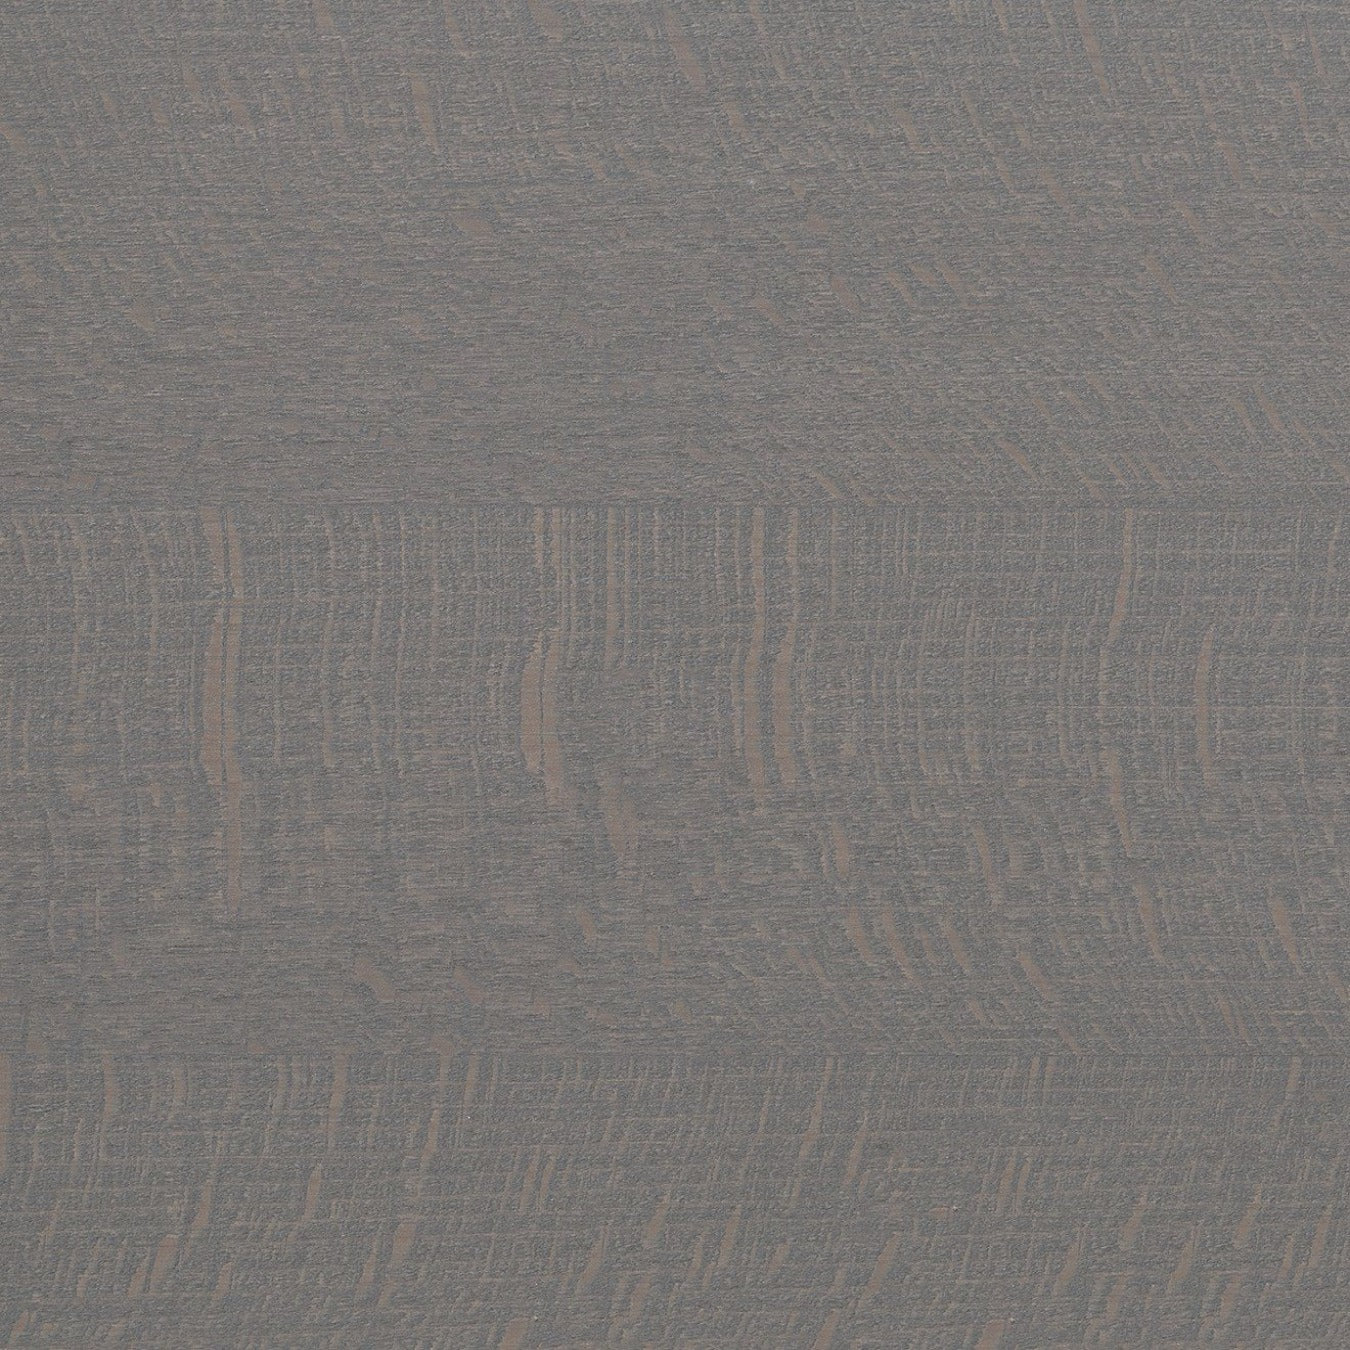 Sample (zoomed in) of the Flint finish